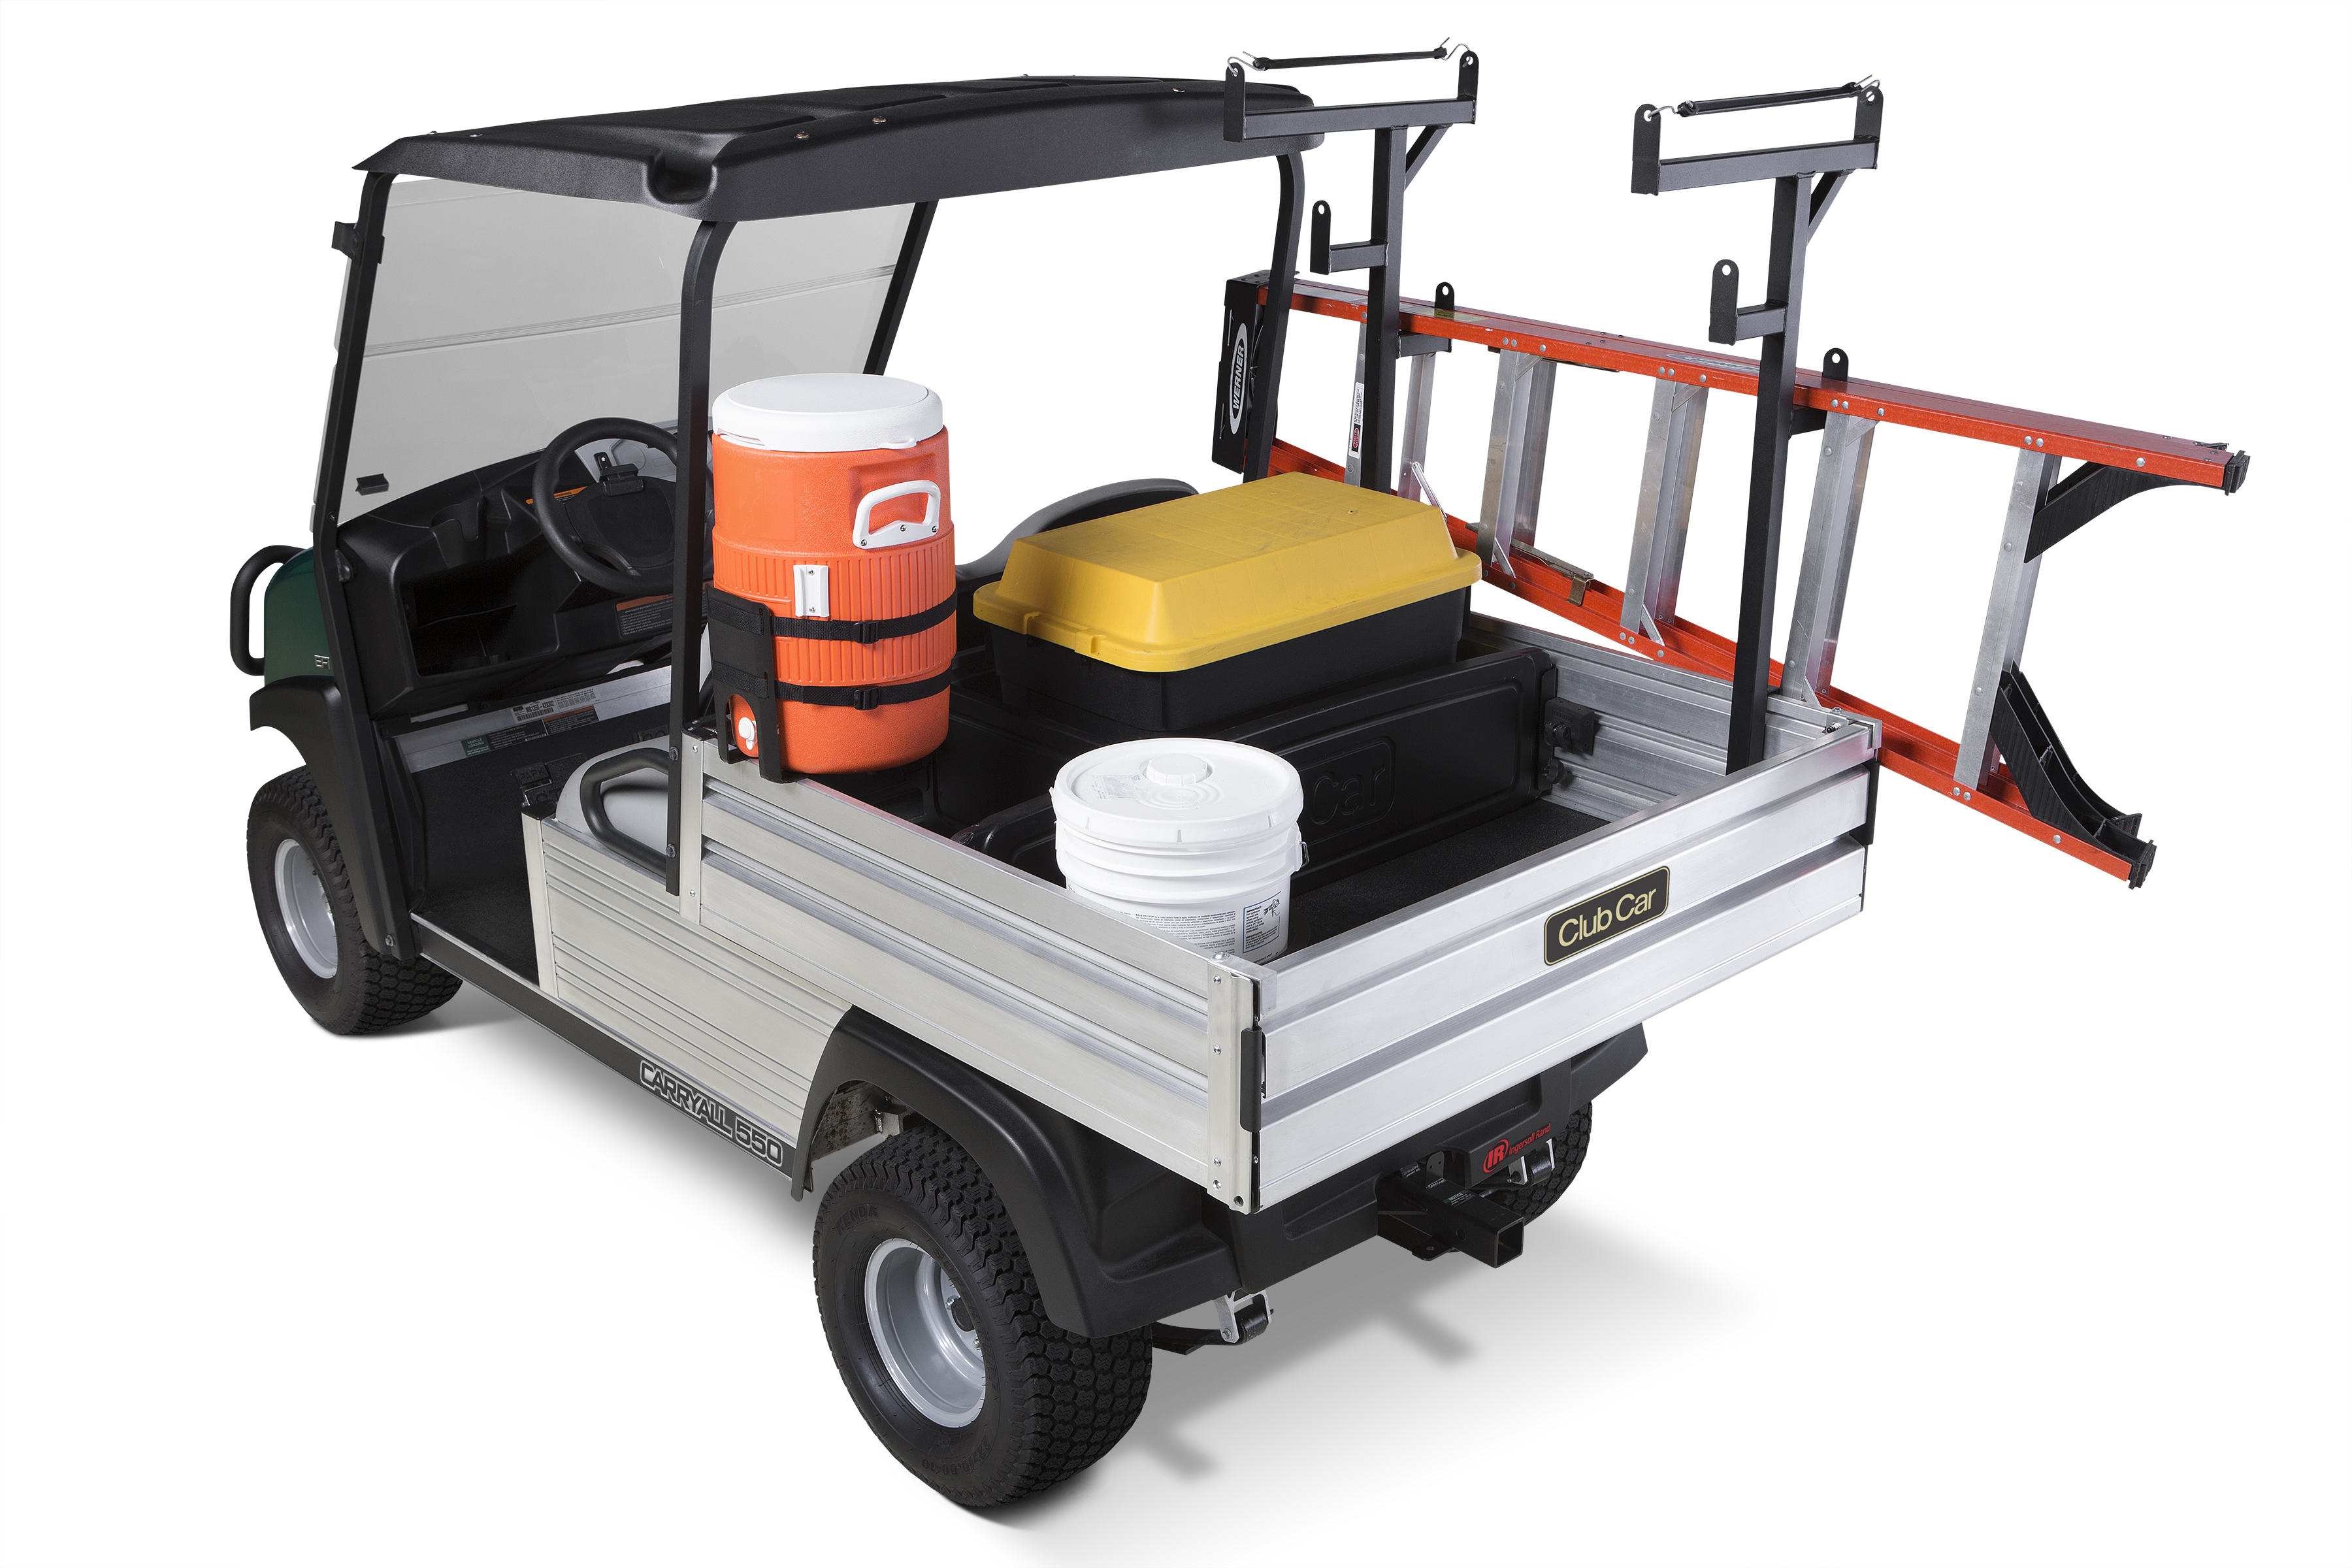 Carryall utility vehicles accommodate the VersAttach bed-based attachment system. The System protects and organizes gear and keeps crews moving.